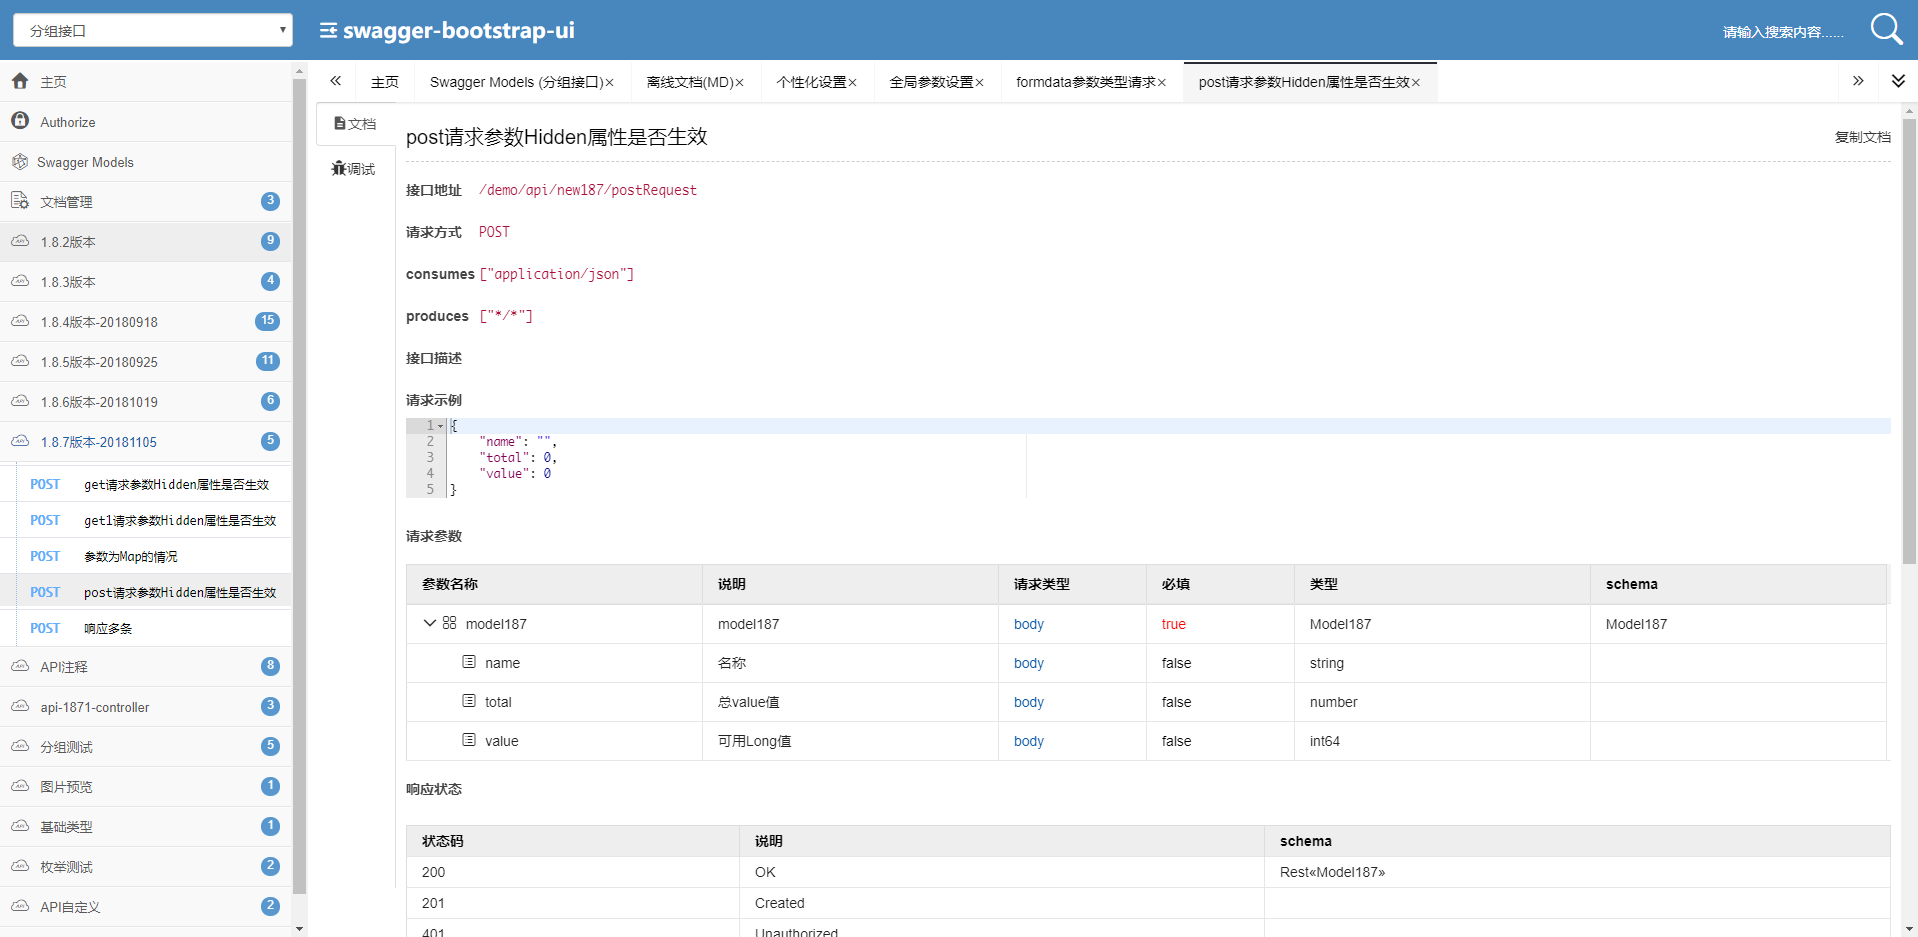 Swagger-Bootstrap-Ui 1.8.7 发布，Swagger增强UI 实现